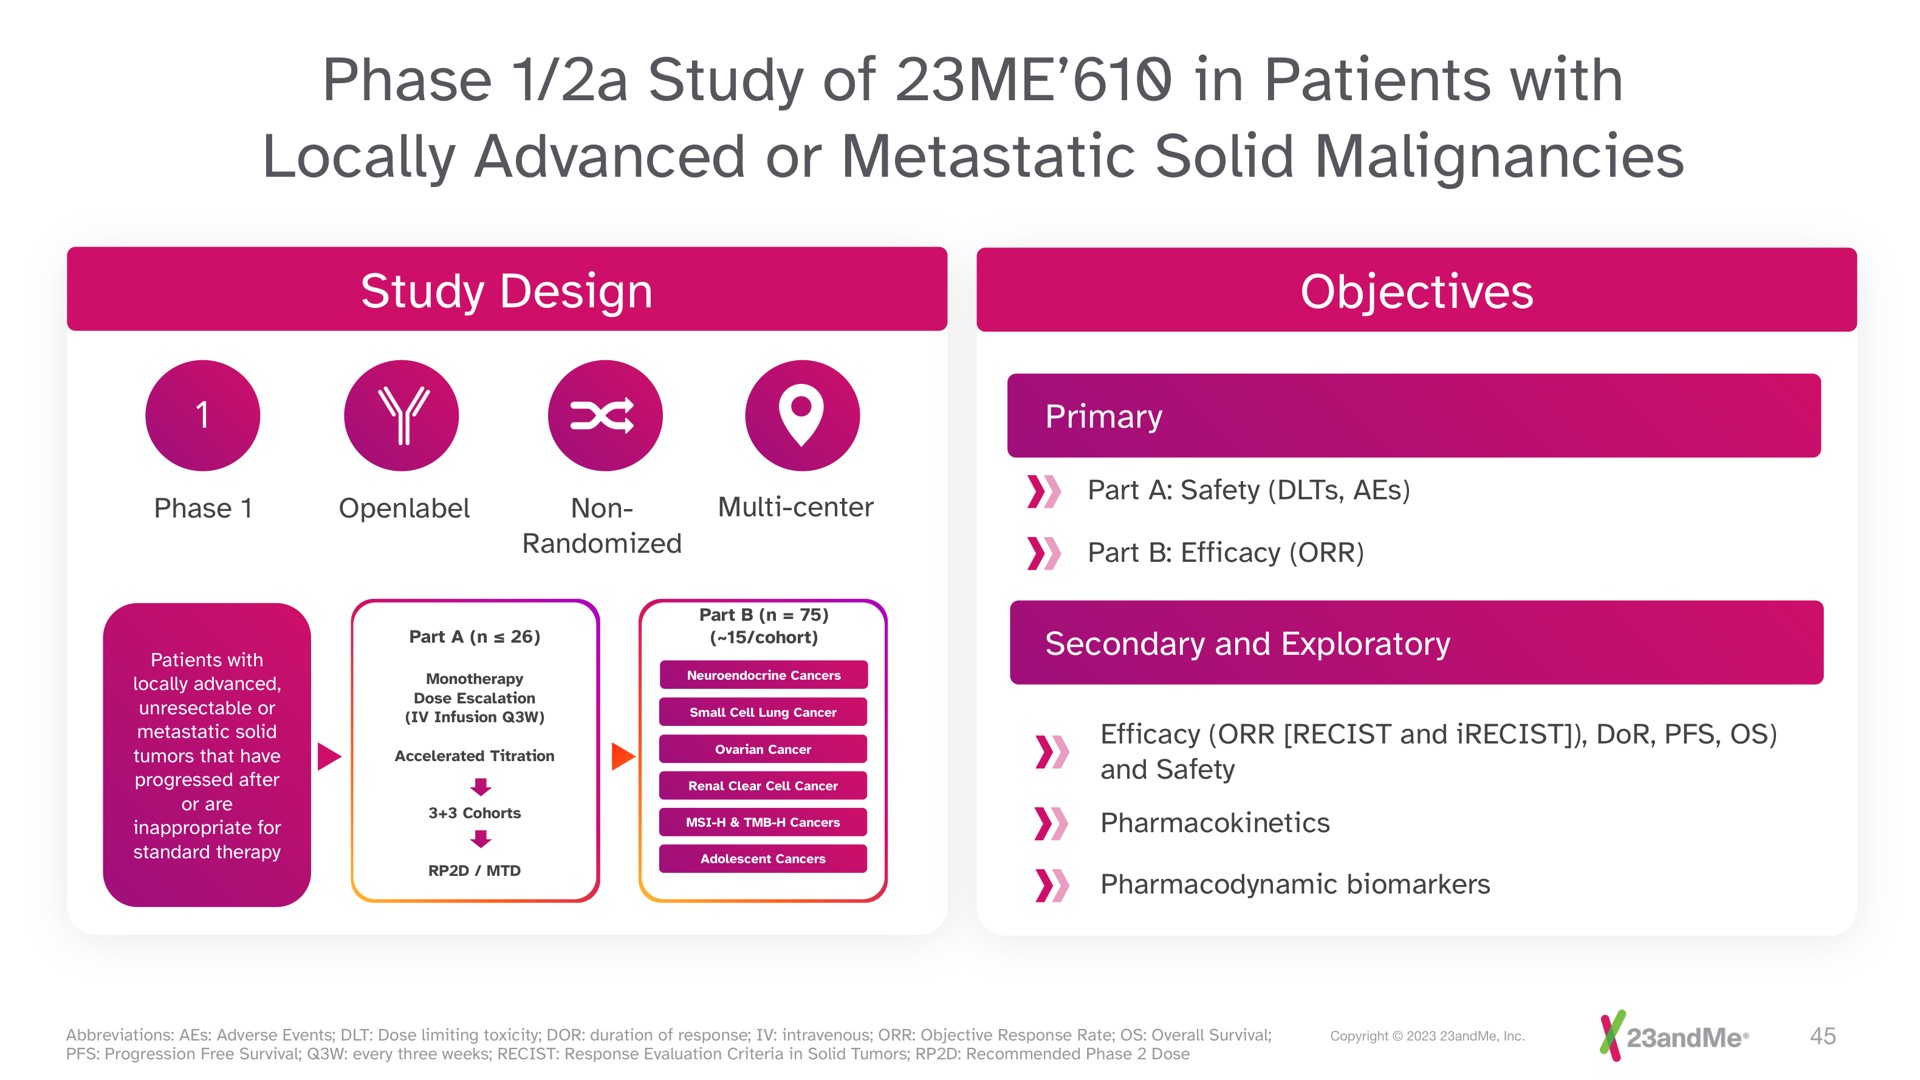 phase a study of me in patients with locally advanced or metastatic solid malignancies | 23andMe